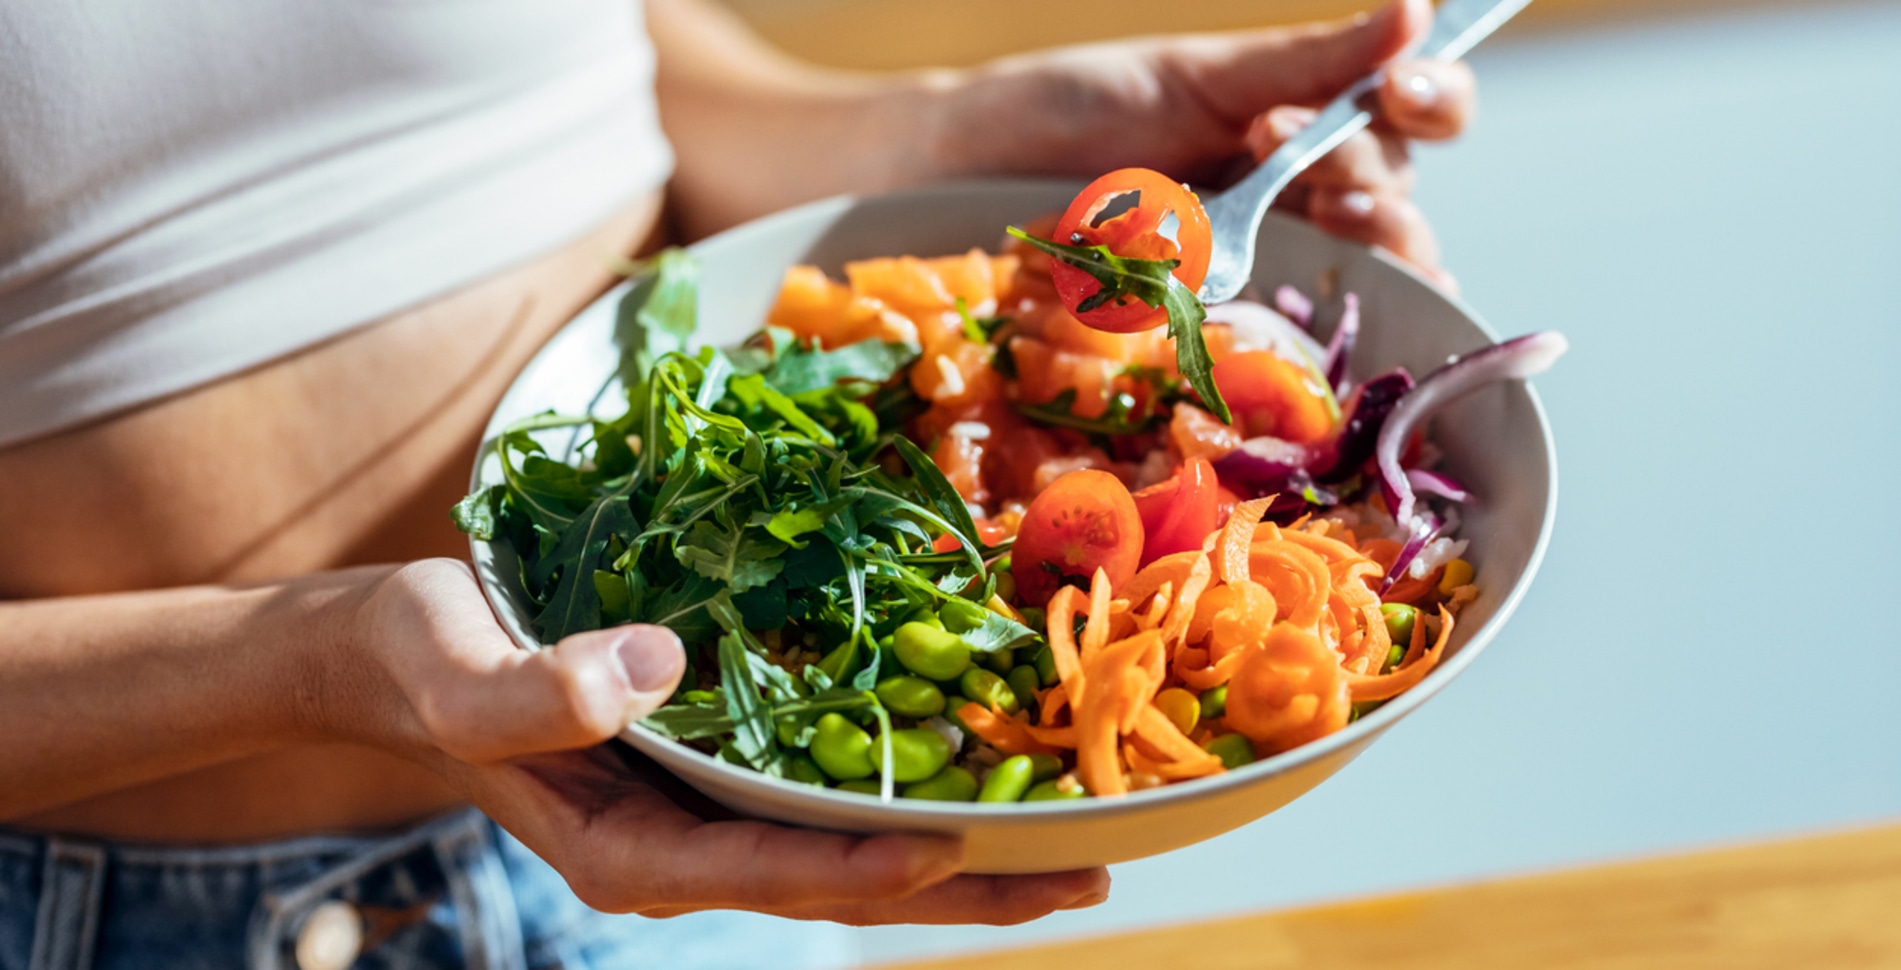 Can a Plant-Based Diet Help People With Type 1 Diabetes? An Expert Weighs In